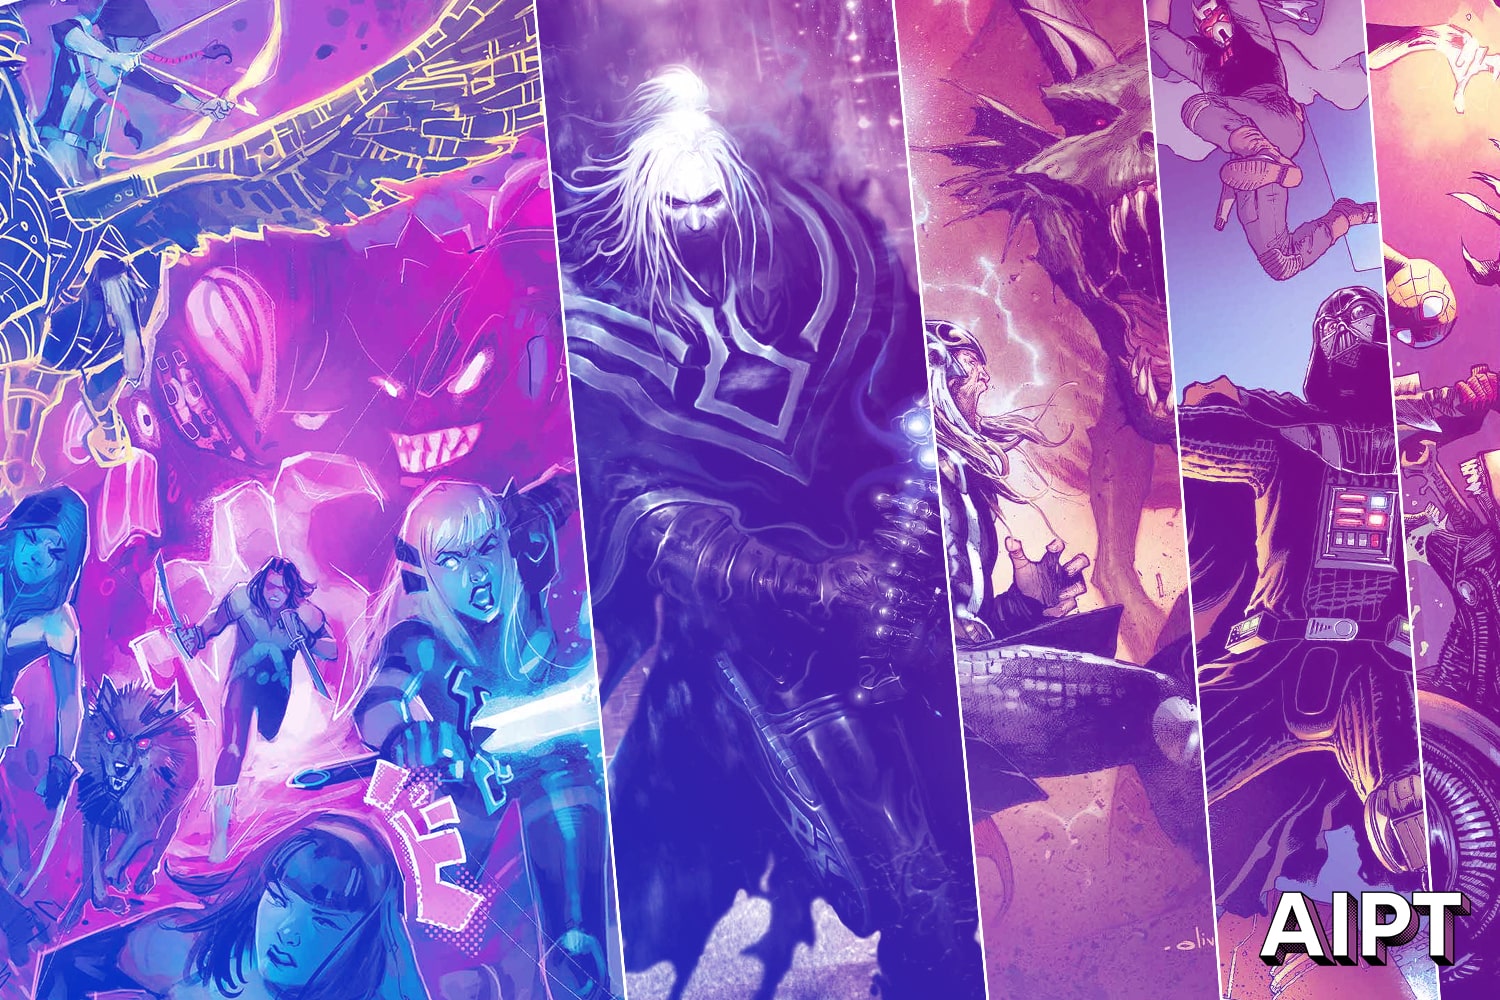 January 2021 Marvel Comics solicitations: It's an Alien takeover!